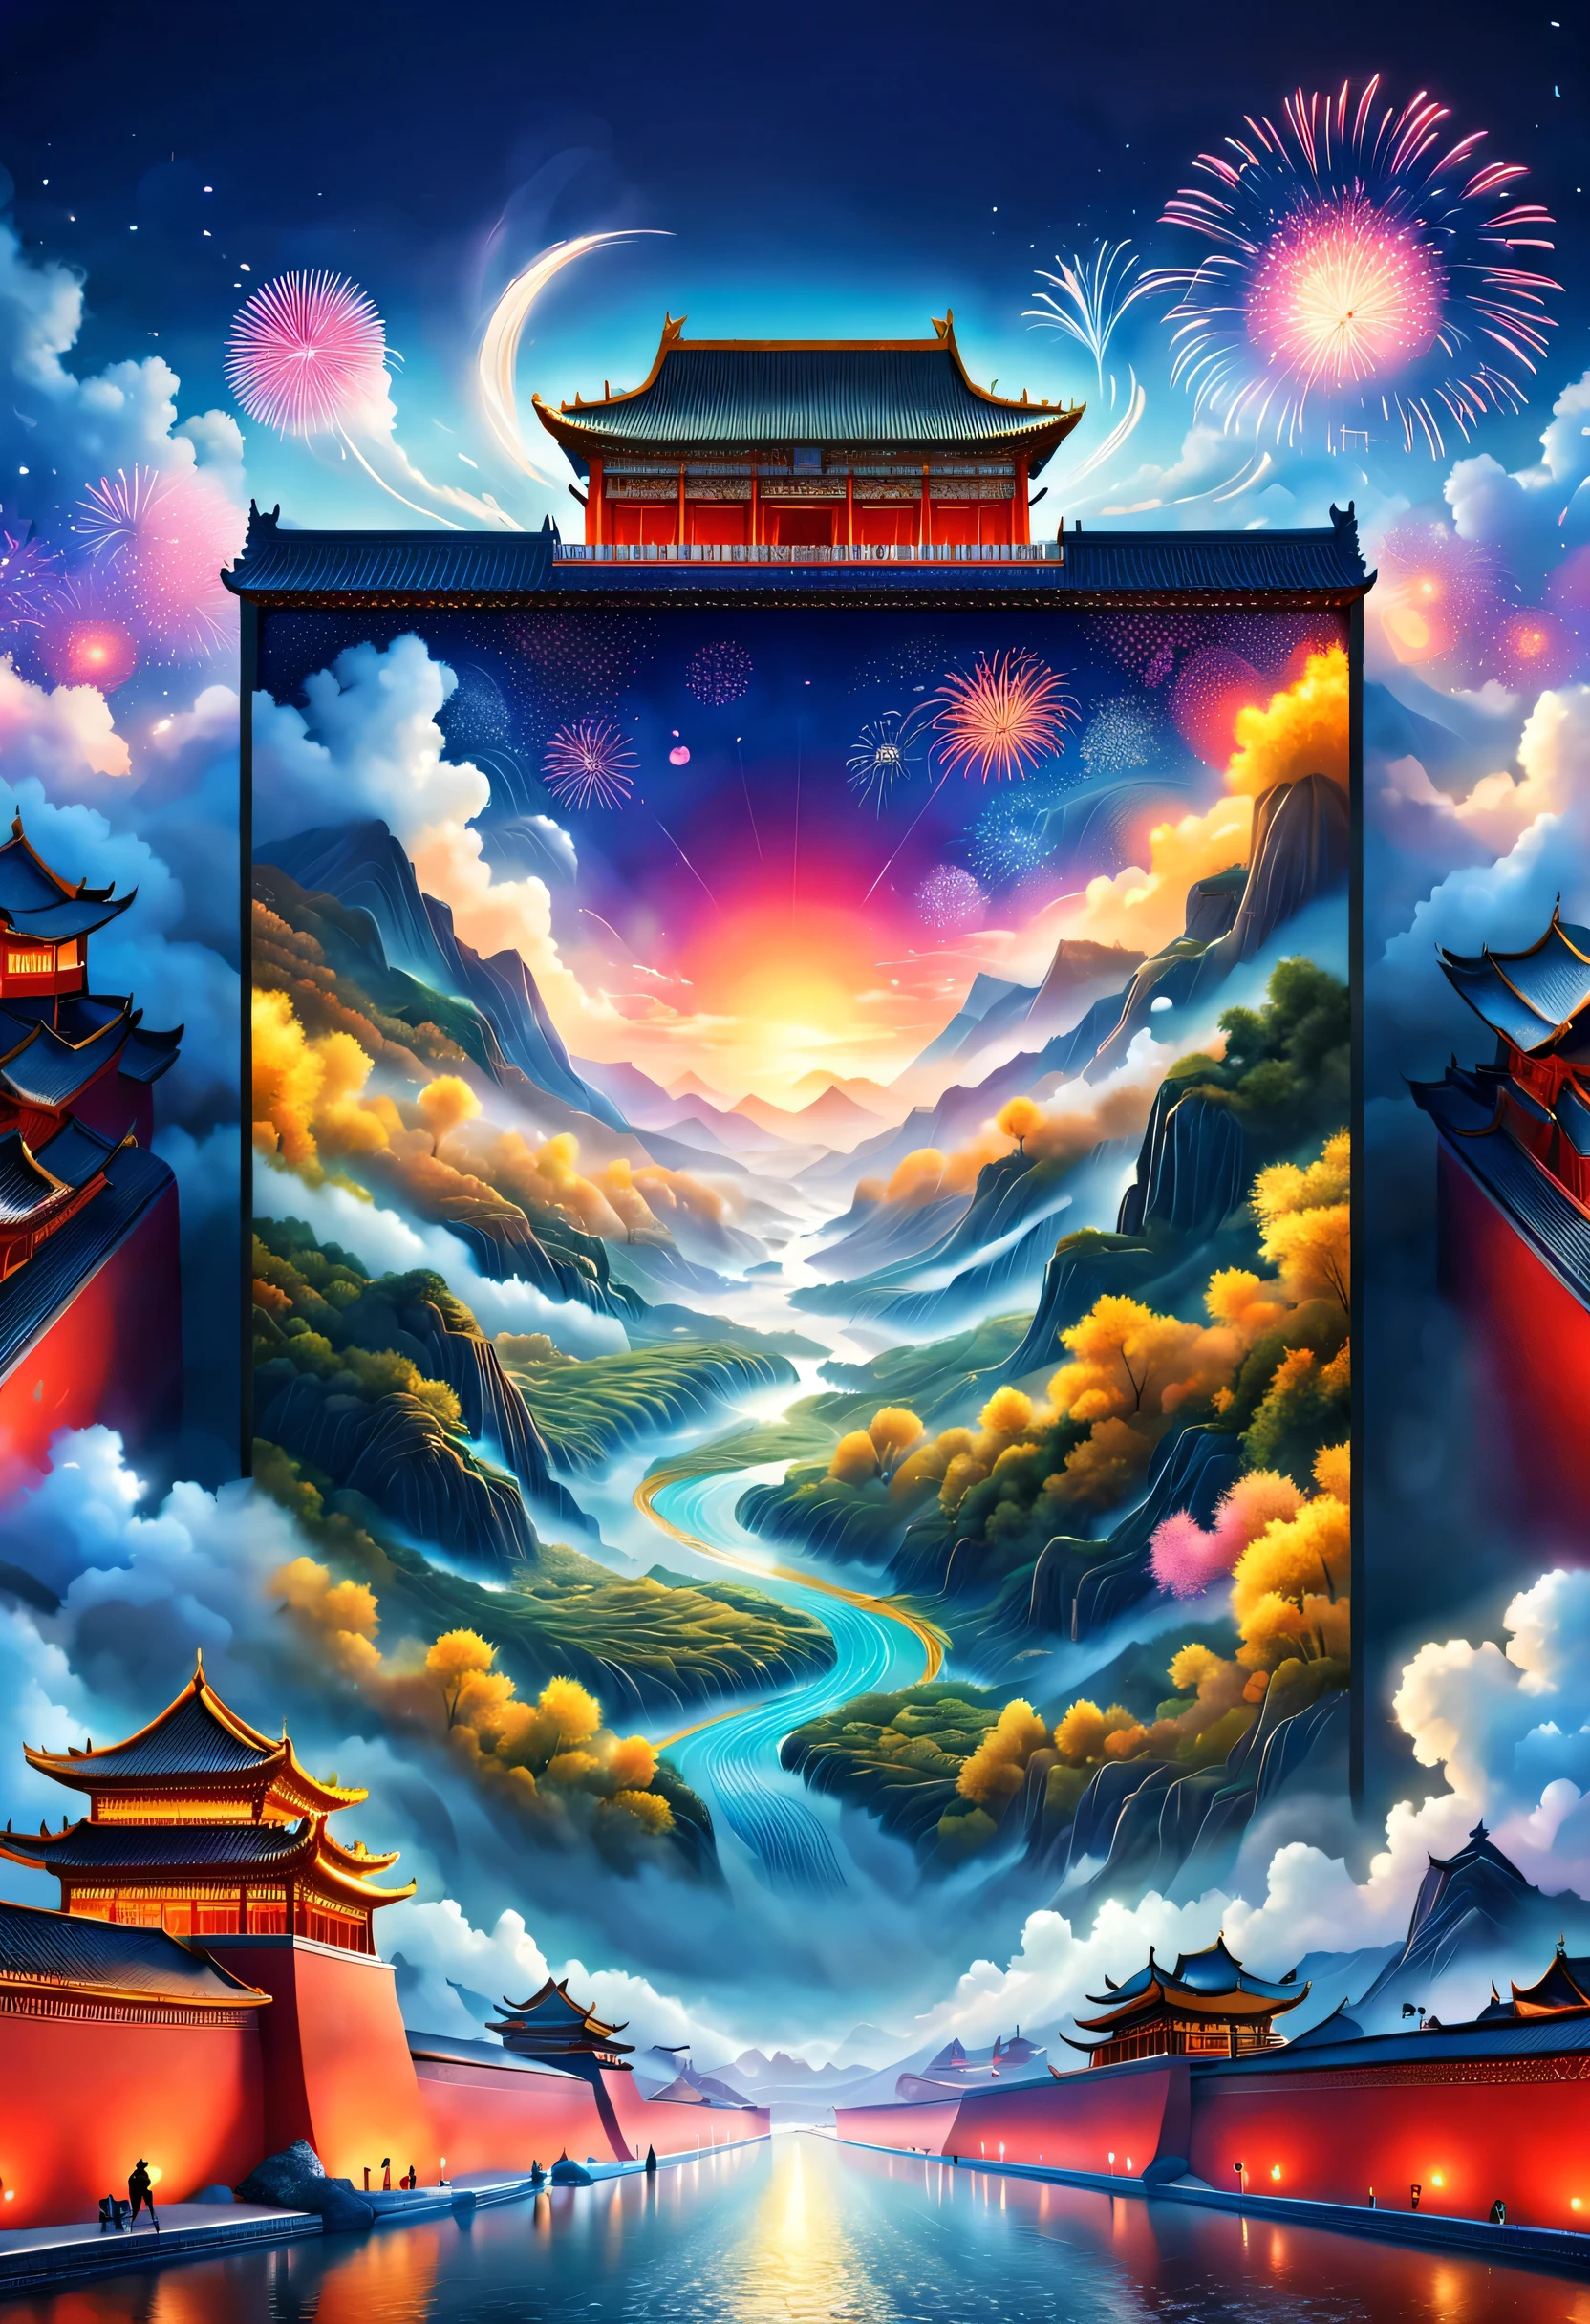 （Giant LED screen giant projection《Thousands of miles of rivers and mountains map》Scene on the red wall of the Forbidden City in China），（Projection screen on the red wall of the palace. Giant LED screen with golden 2024 and Happy new year：1.37）），Inspired by Wang Ximeng of the Northern Song Dynasty《Thousands of miles of rivers and mountains map》Uniformity，Light show，Fireworks bloom in the sky, Many ribbons and confetti fall in the air, (a happy new year)，Giant LED screen：It is 147 meters long、The 27-meter-wide Giant LED screen is like an ancient painting that unfolds slowly.，Playing with the《Thousands of miles of rivers and mountains map》figurative，Render dynamic images，Panoramic intelligent orchestration，
Valerio Orgiatti,author：Shigeru Ban,globalillumination,colored lighting,modern, The content is very detailed, Best quality at best, tmasterpiece, A high resolution, Photofigurative realism, hyper realisitc, current, 8k,LED screen，high - tech，